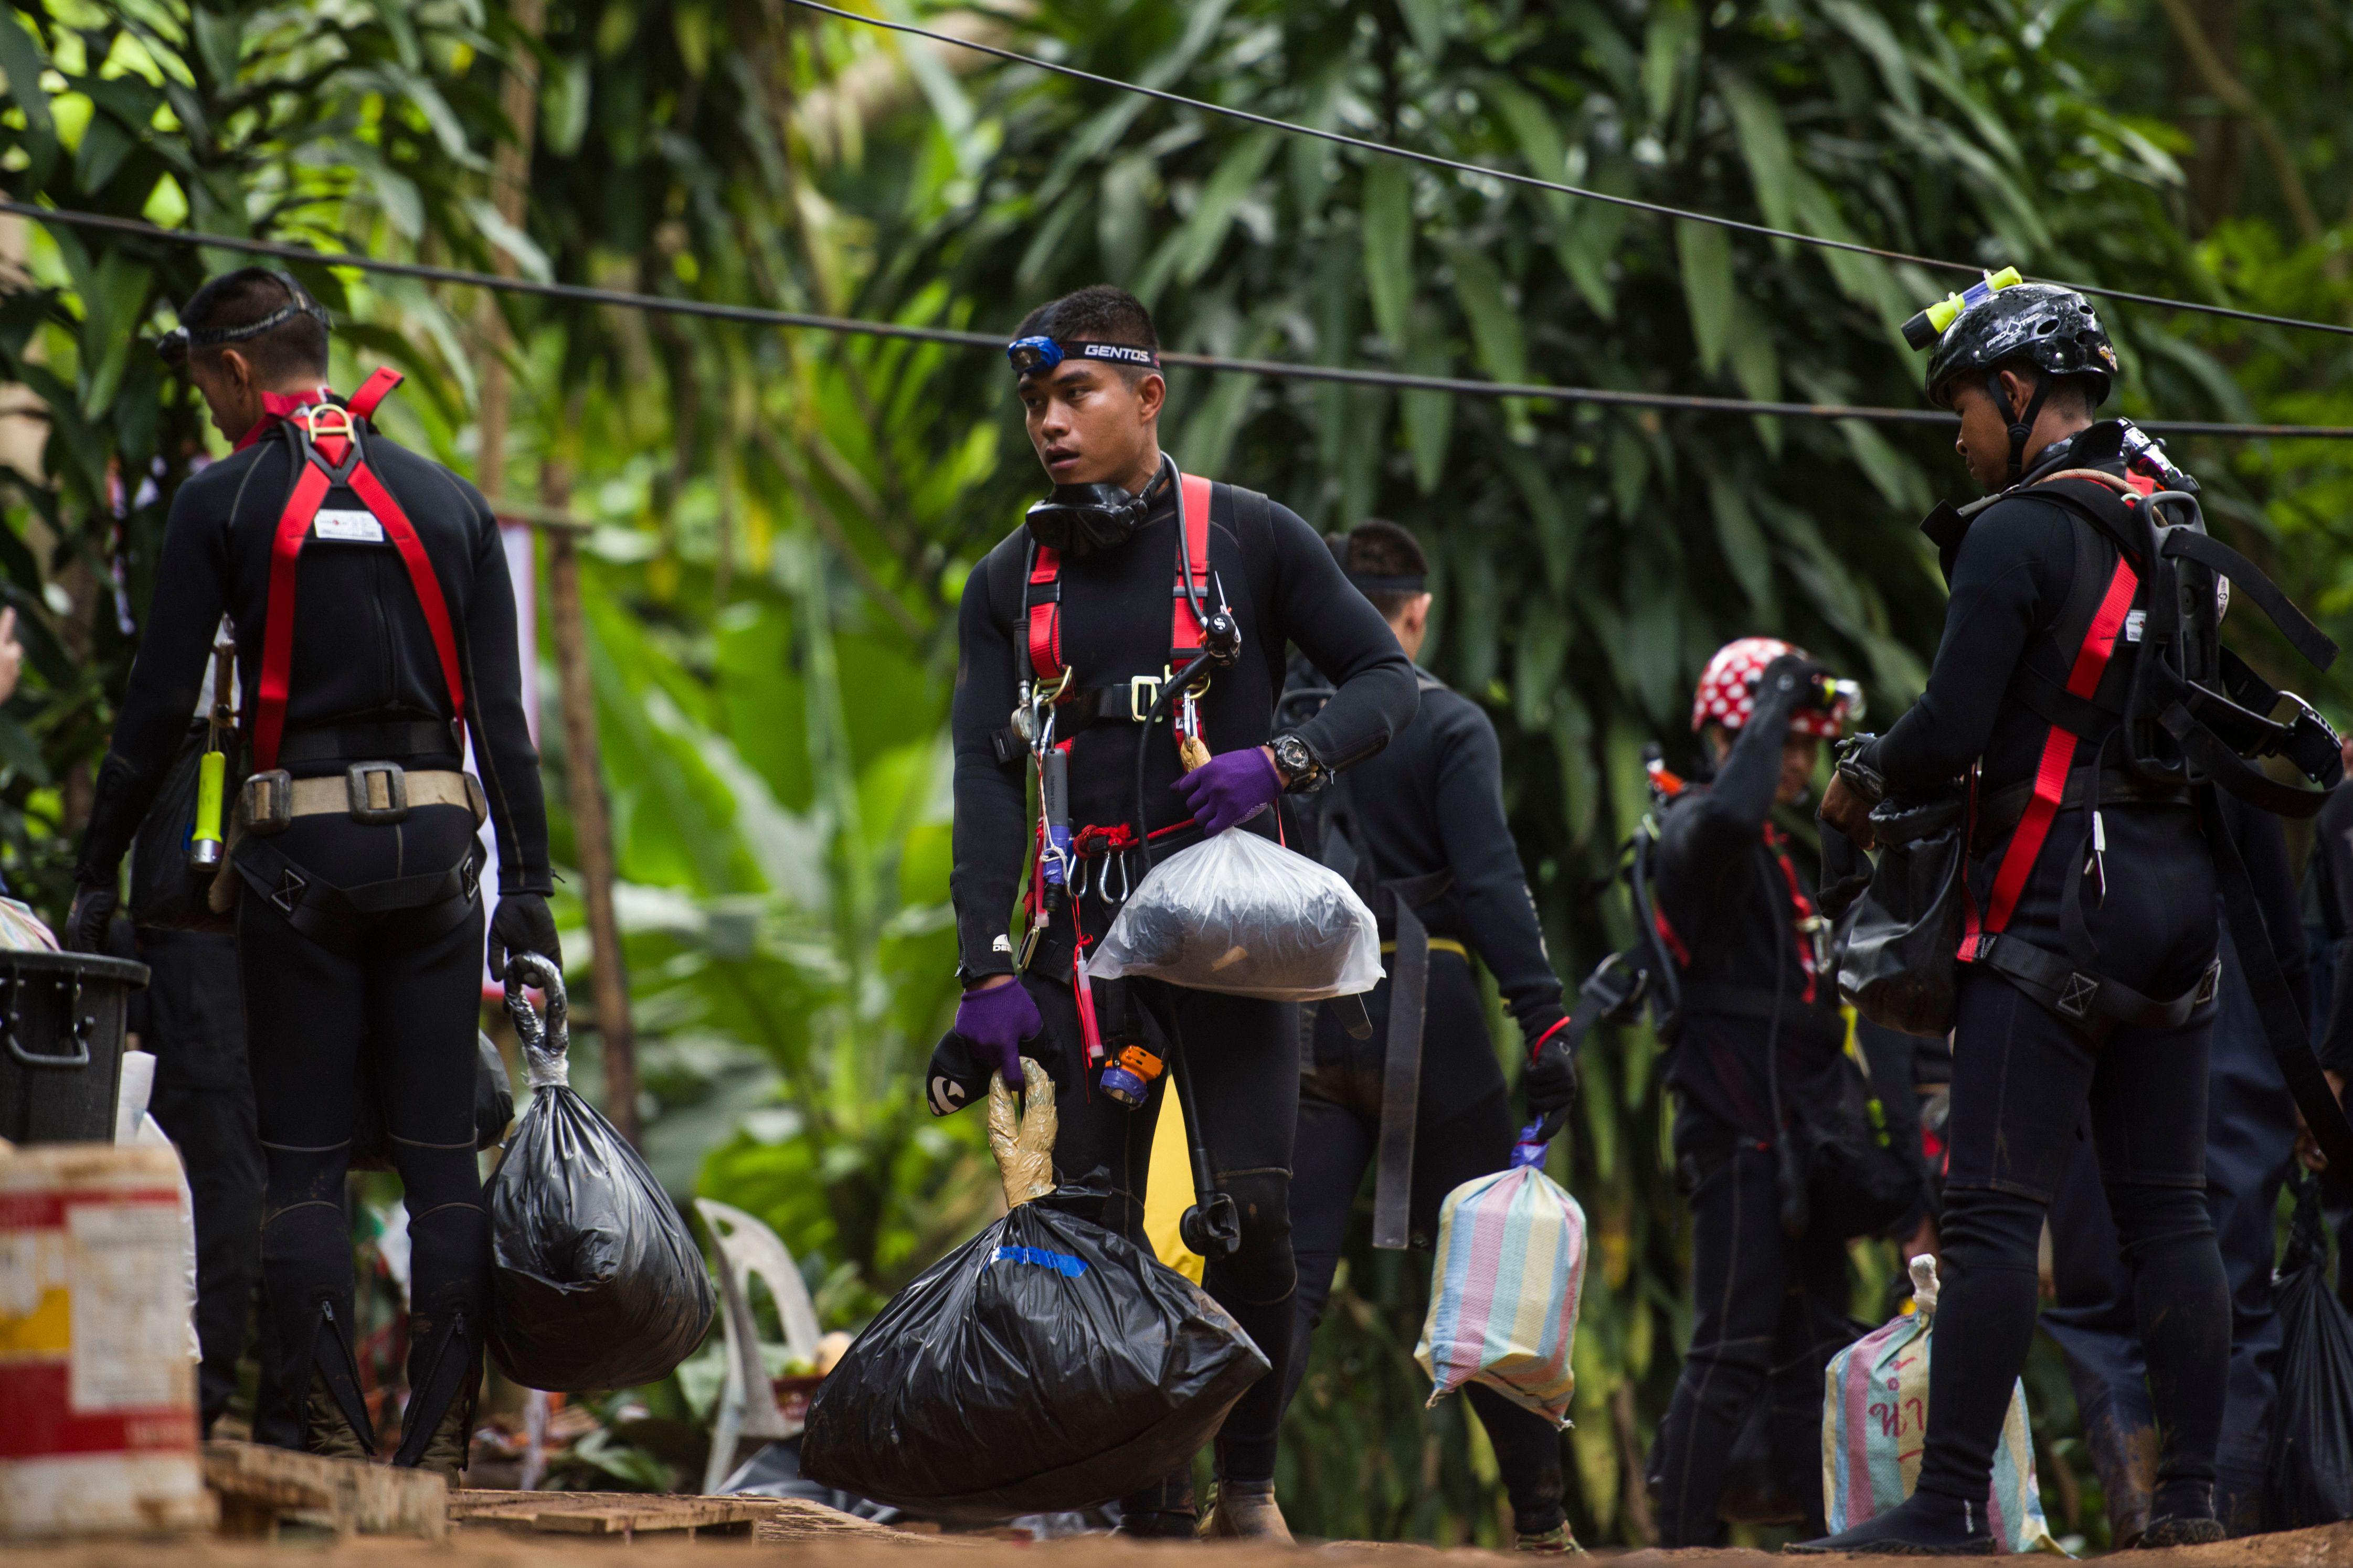 Thai divers carry supplies as rescue operations continue for 12 boys and their coach trapped at Tham Luang cave at Khun Nam Nang Non Forest Park in the Mae Sai district of Chiang Rai province on July 5, 2018. - Thai rescuers vowed to take a 'no risk' approach to freeing 12 boys and their football coach from a flooded cave, as fresh video emerged on July 4 showing the team in good spirits following their astonishing discovery nine days after going missing. (Photo by YE AUNG THU / AFP)        (Photo credit should read YE AUNG THU/AFP/Getty Images)